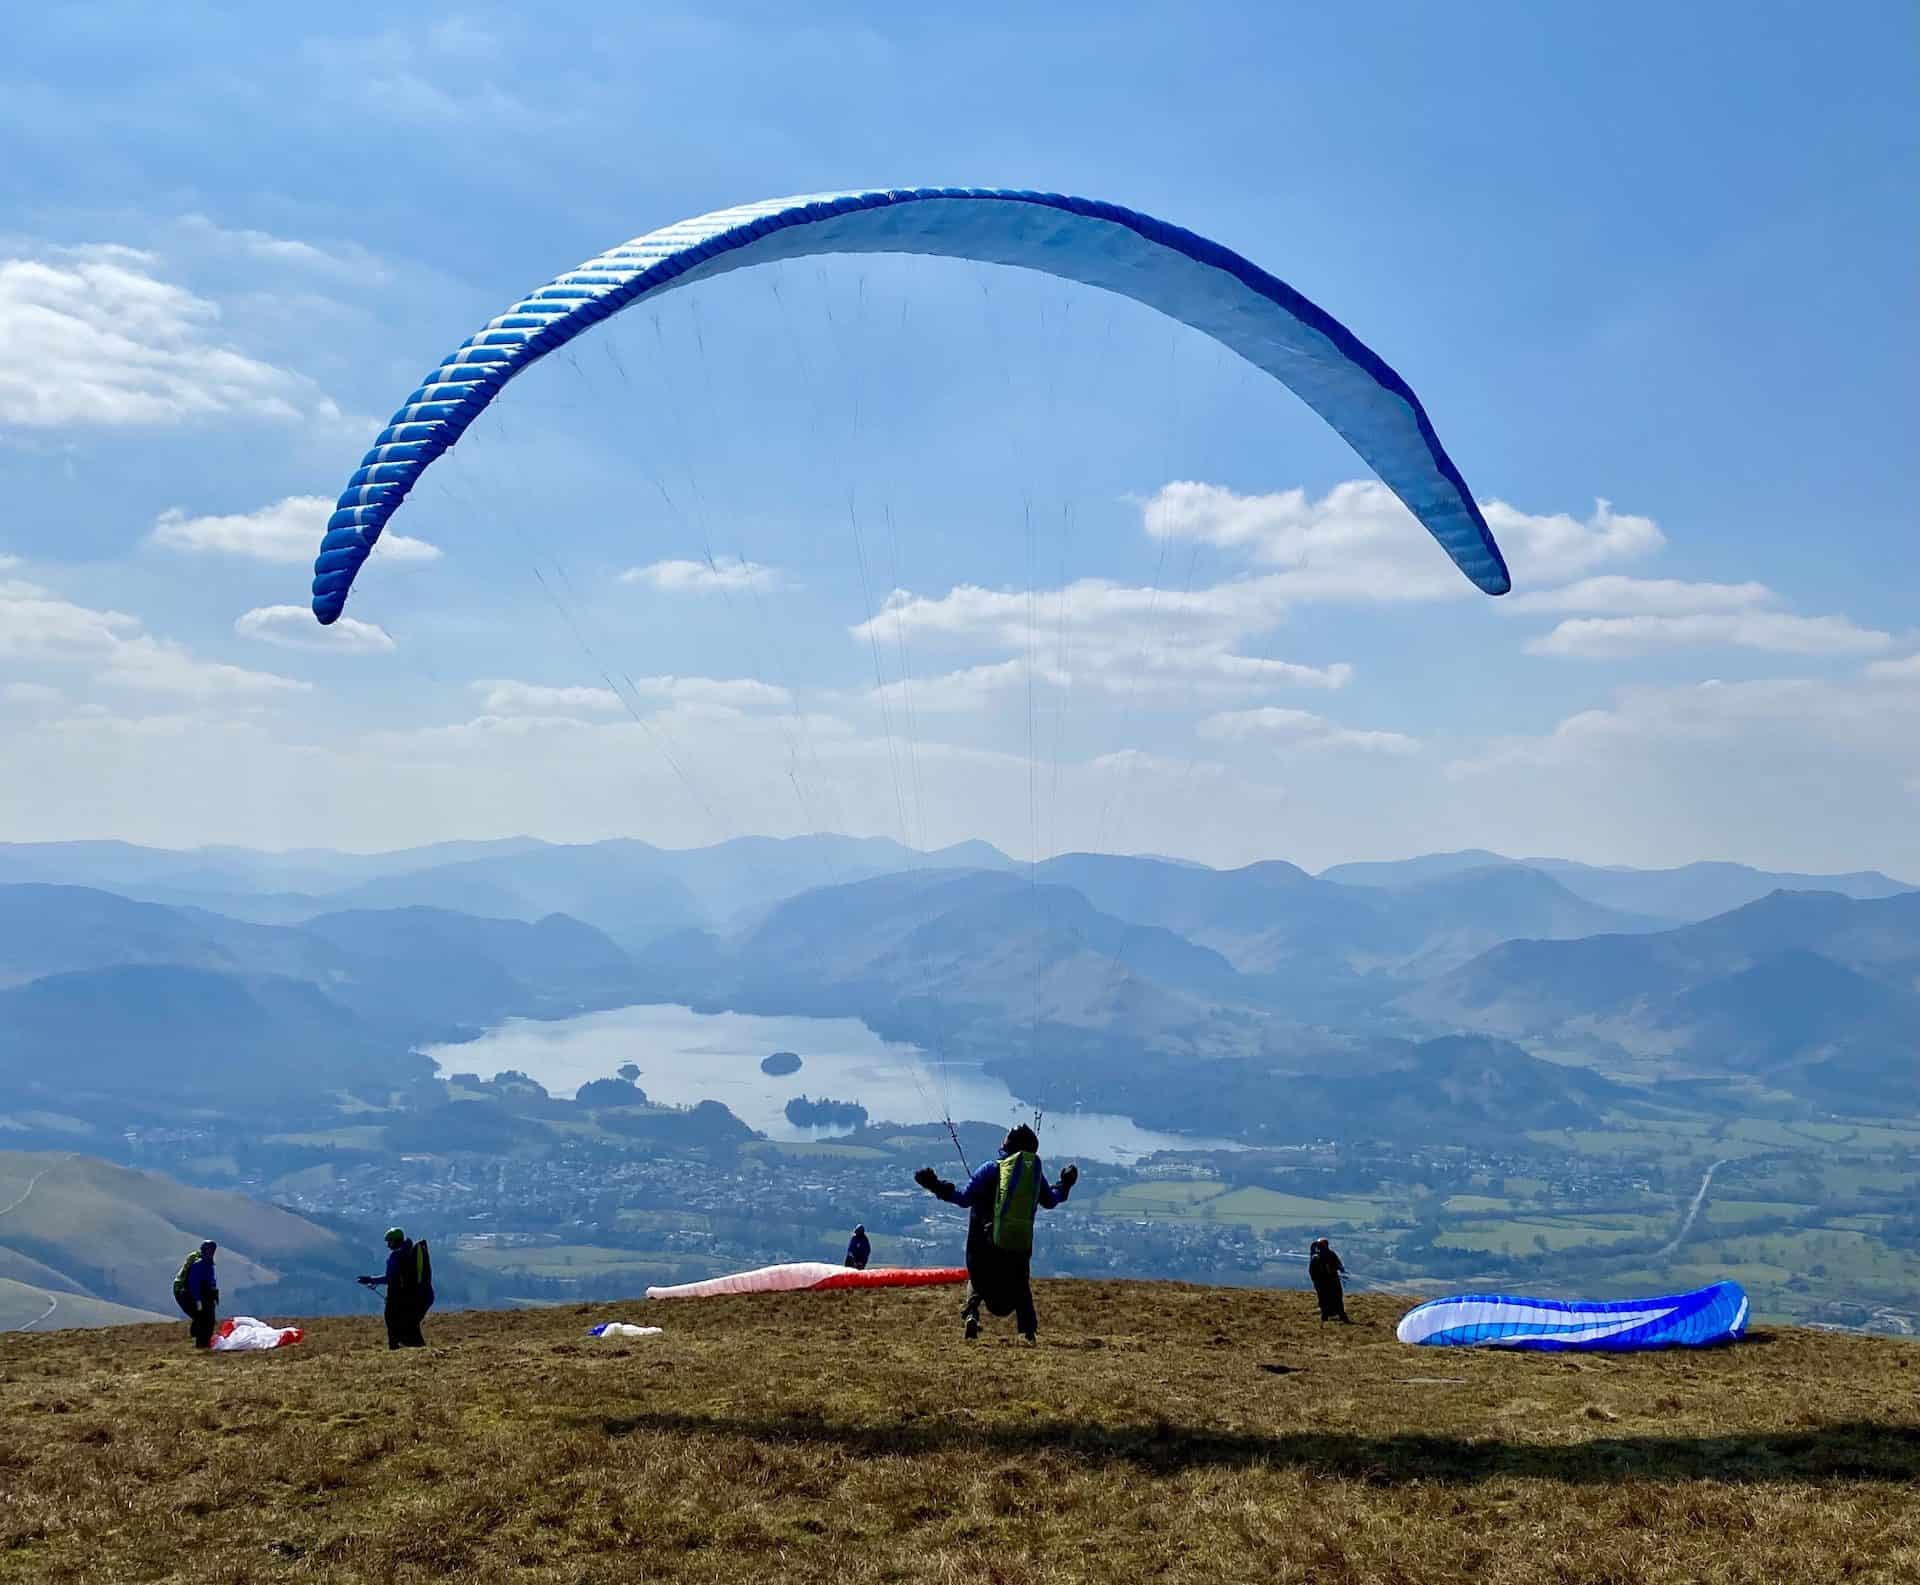 Paragliders on the south-western flanks of the Skiddaw mountain range, about a mile south-east of Little Man. In the background are Keswick and Derwent Water.